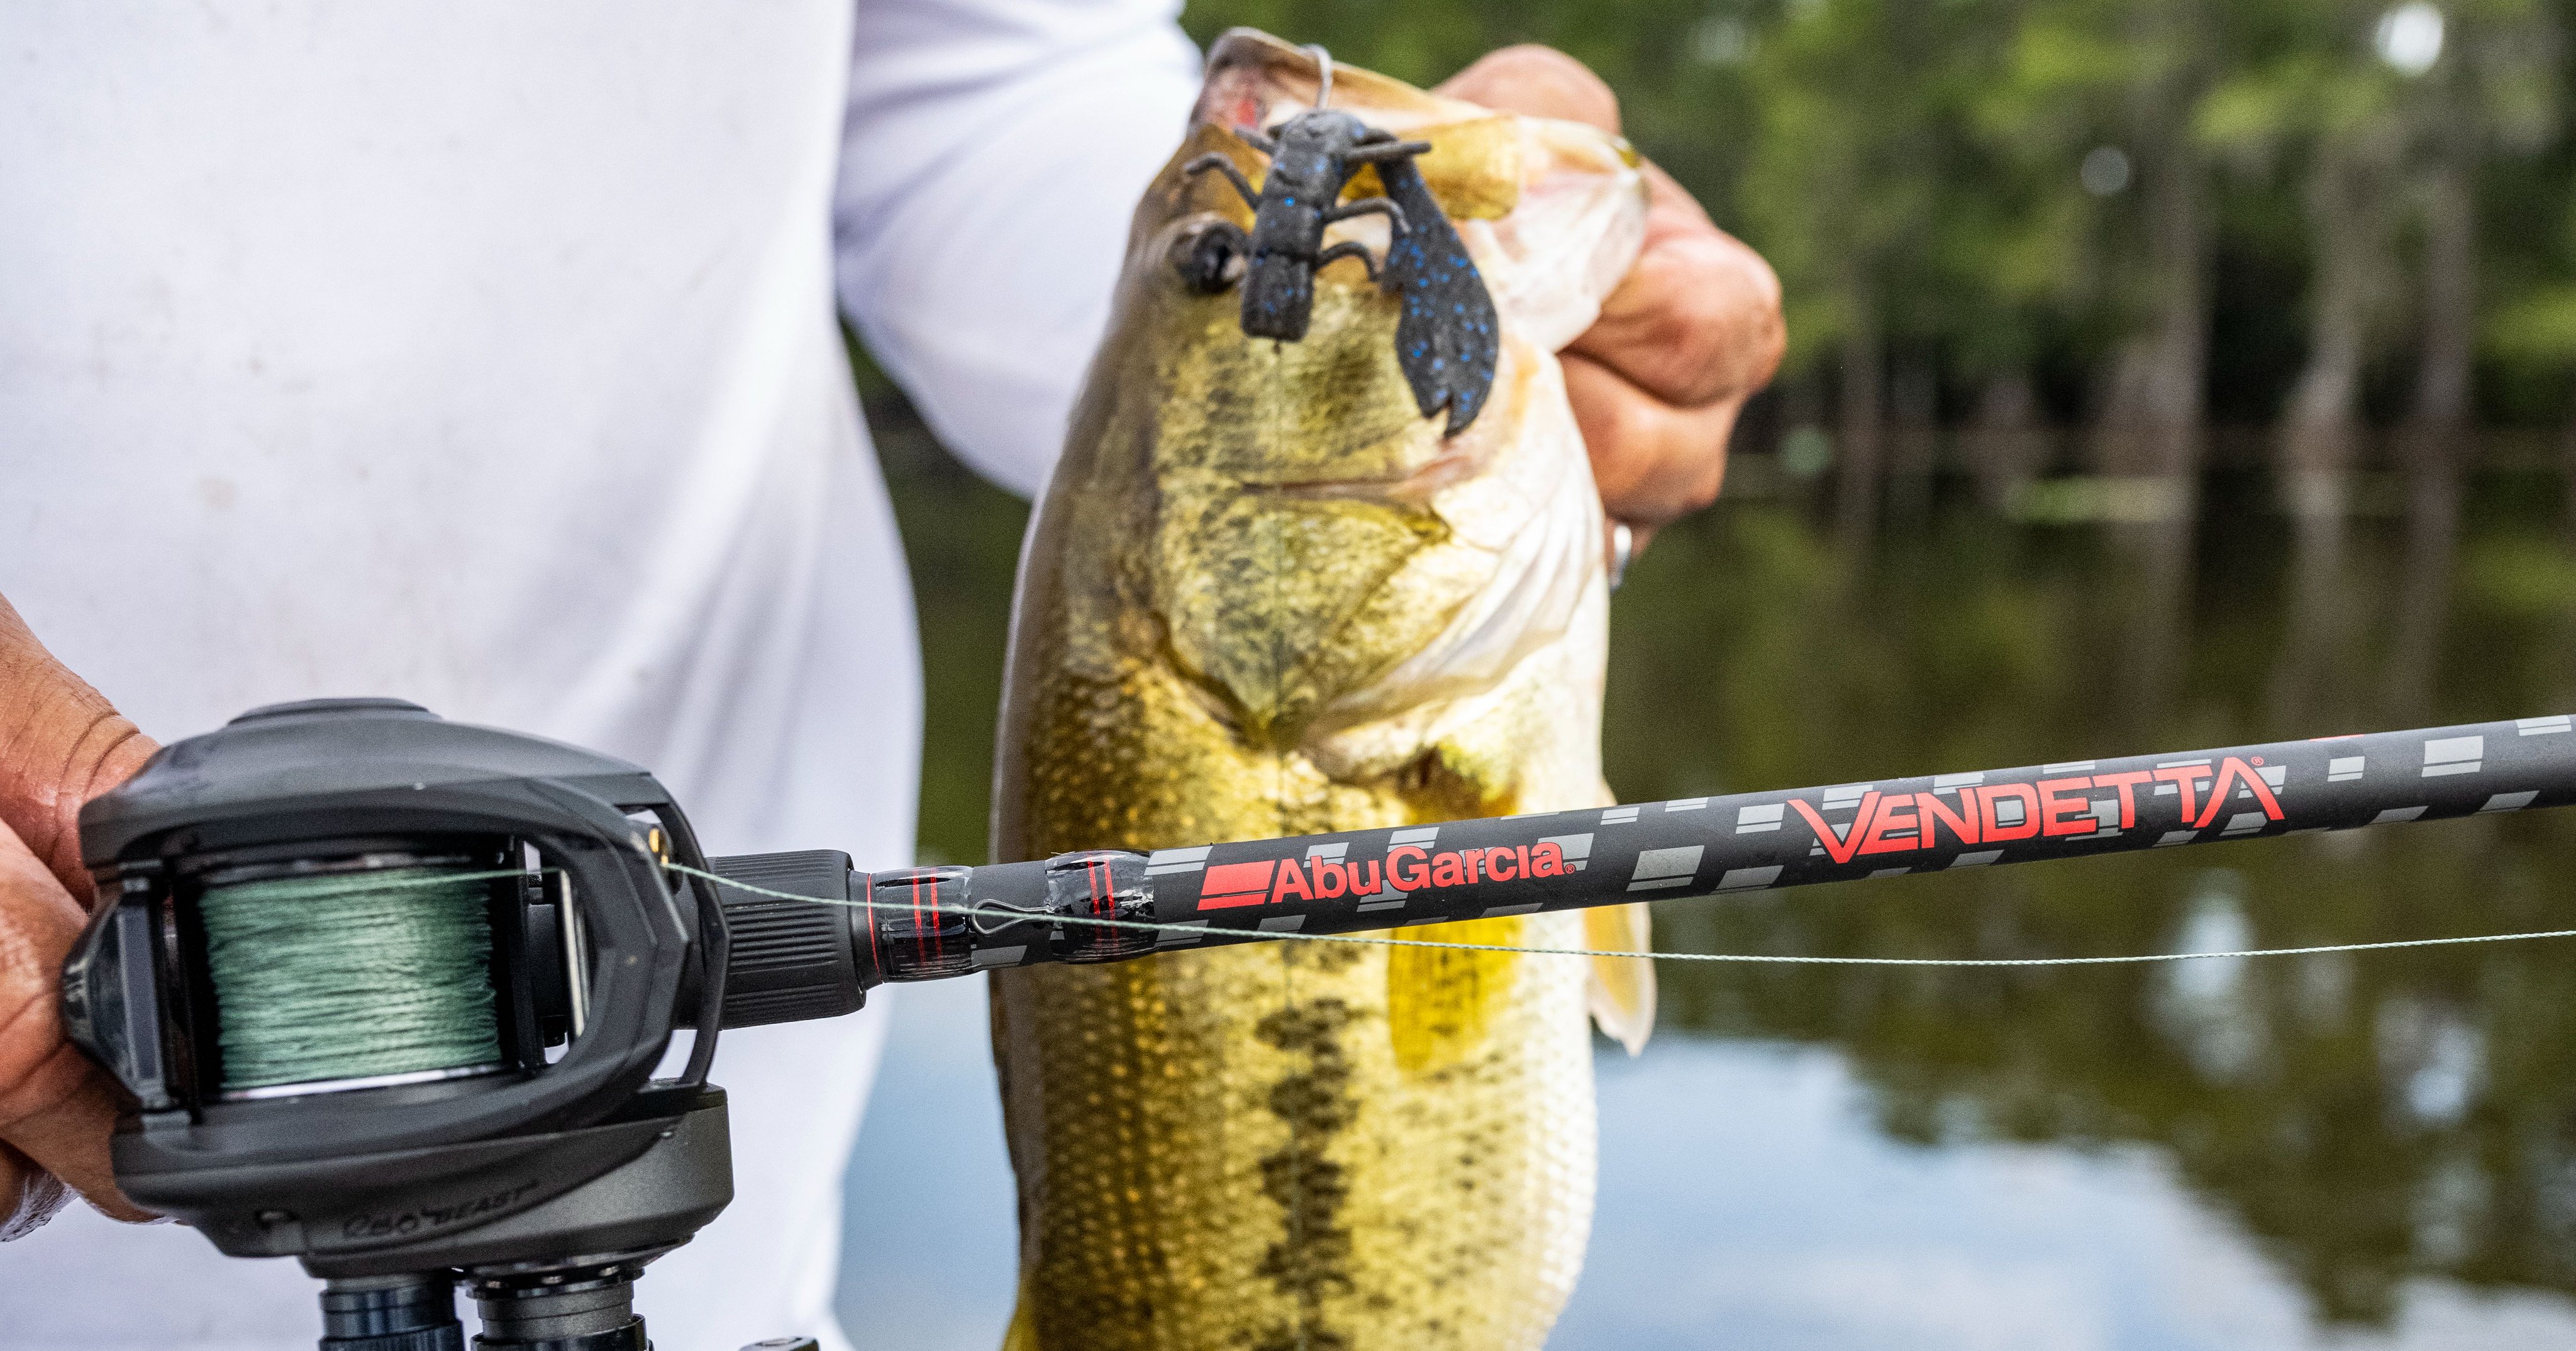 Abu Garcia on X: Introduced at Icast 2021, this new series offers a  lighter and more sensitive Vendetta than ever before. Keep an eye out this  fall for the newest generation of